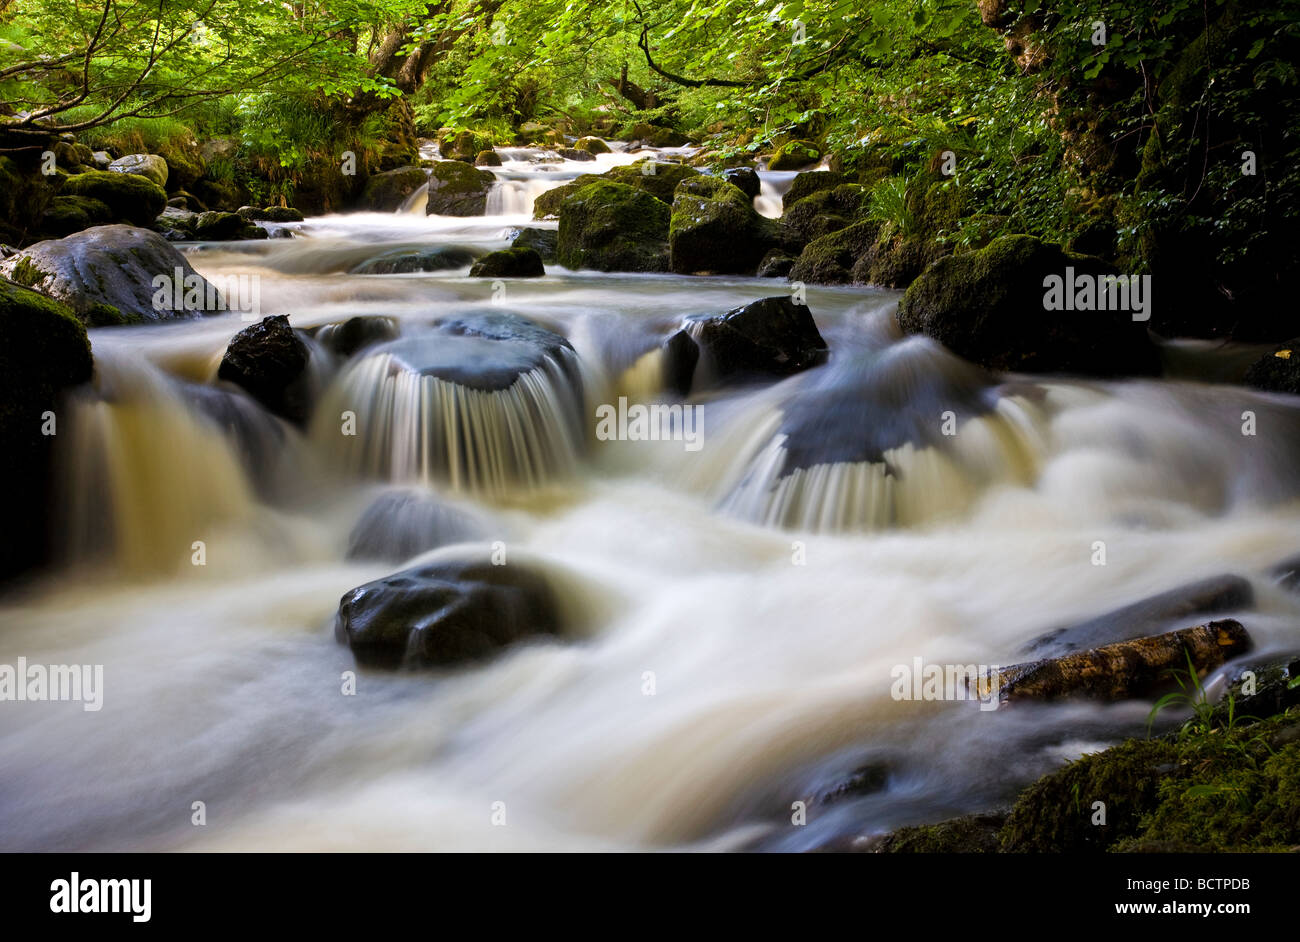 Water flowing in a stream, Aira Beck, just above Aira Force, close to Ullswater in Cumbria, Lake District, England. Now a Unesco World Heritage site Stock Photo